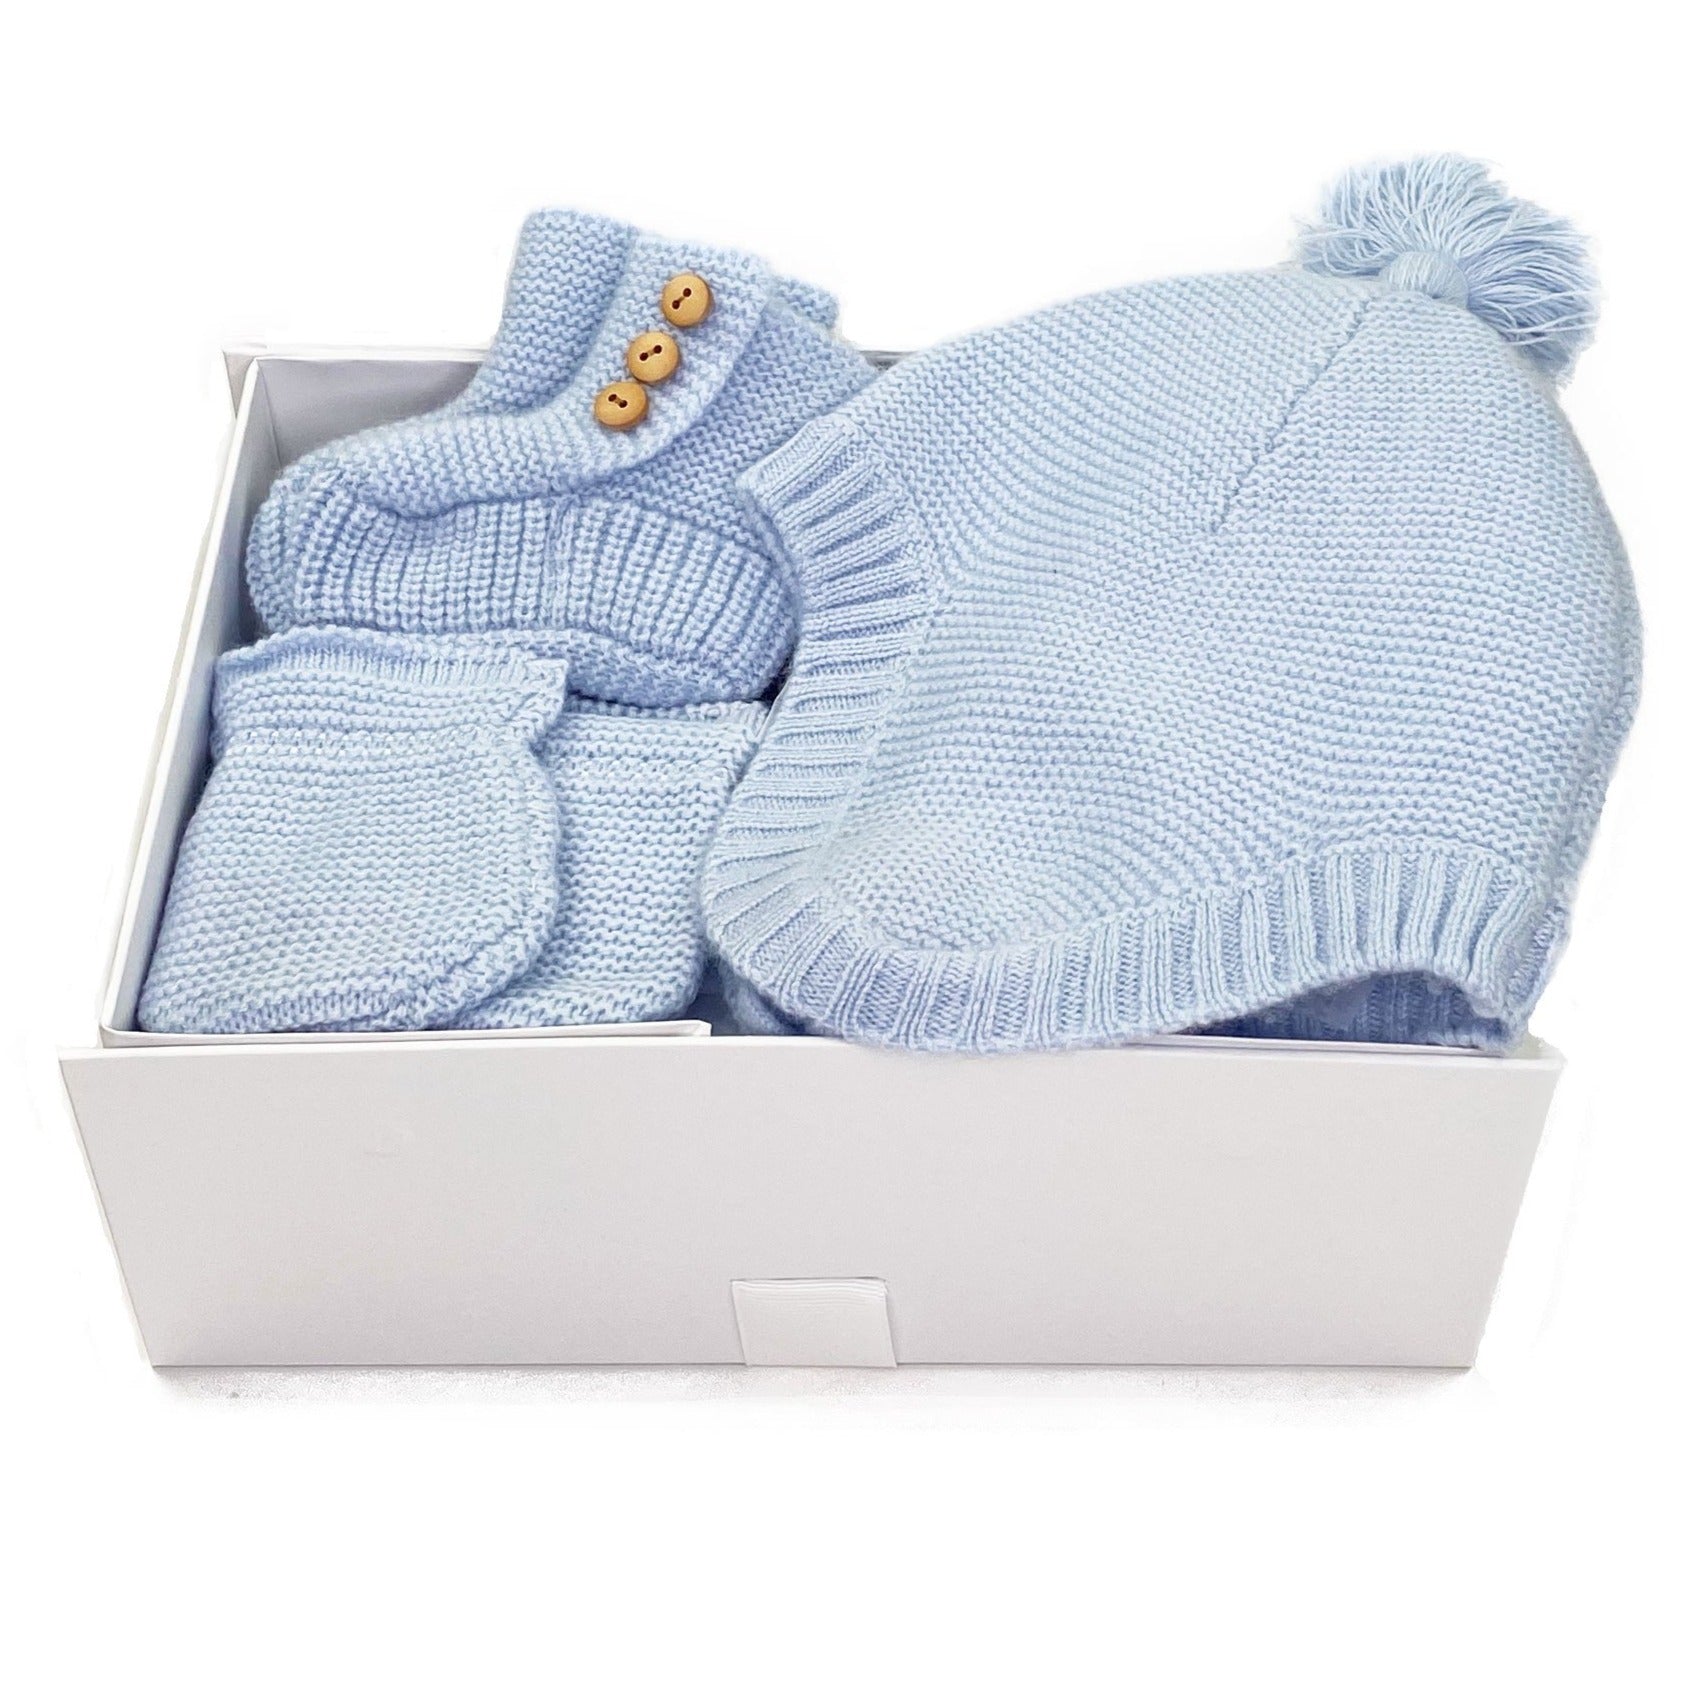 Luxury 3 piece cashmere baby gift in blue colour by Bonjour Baby Baskets